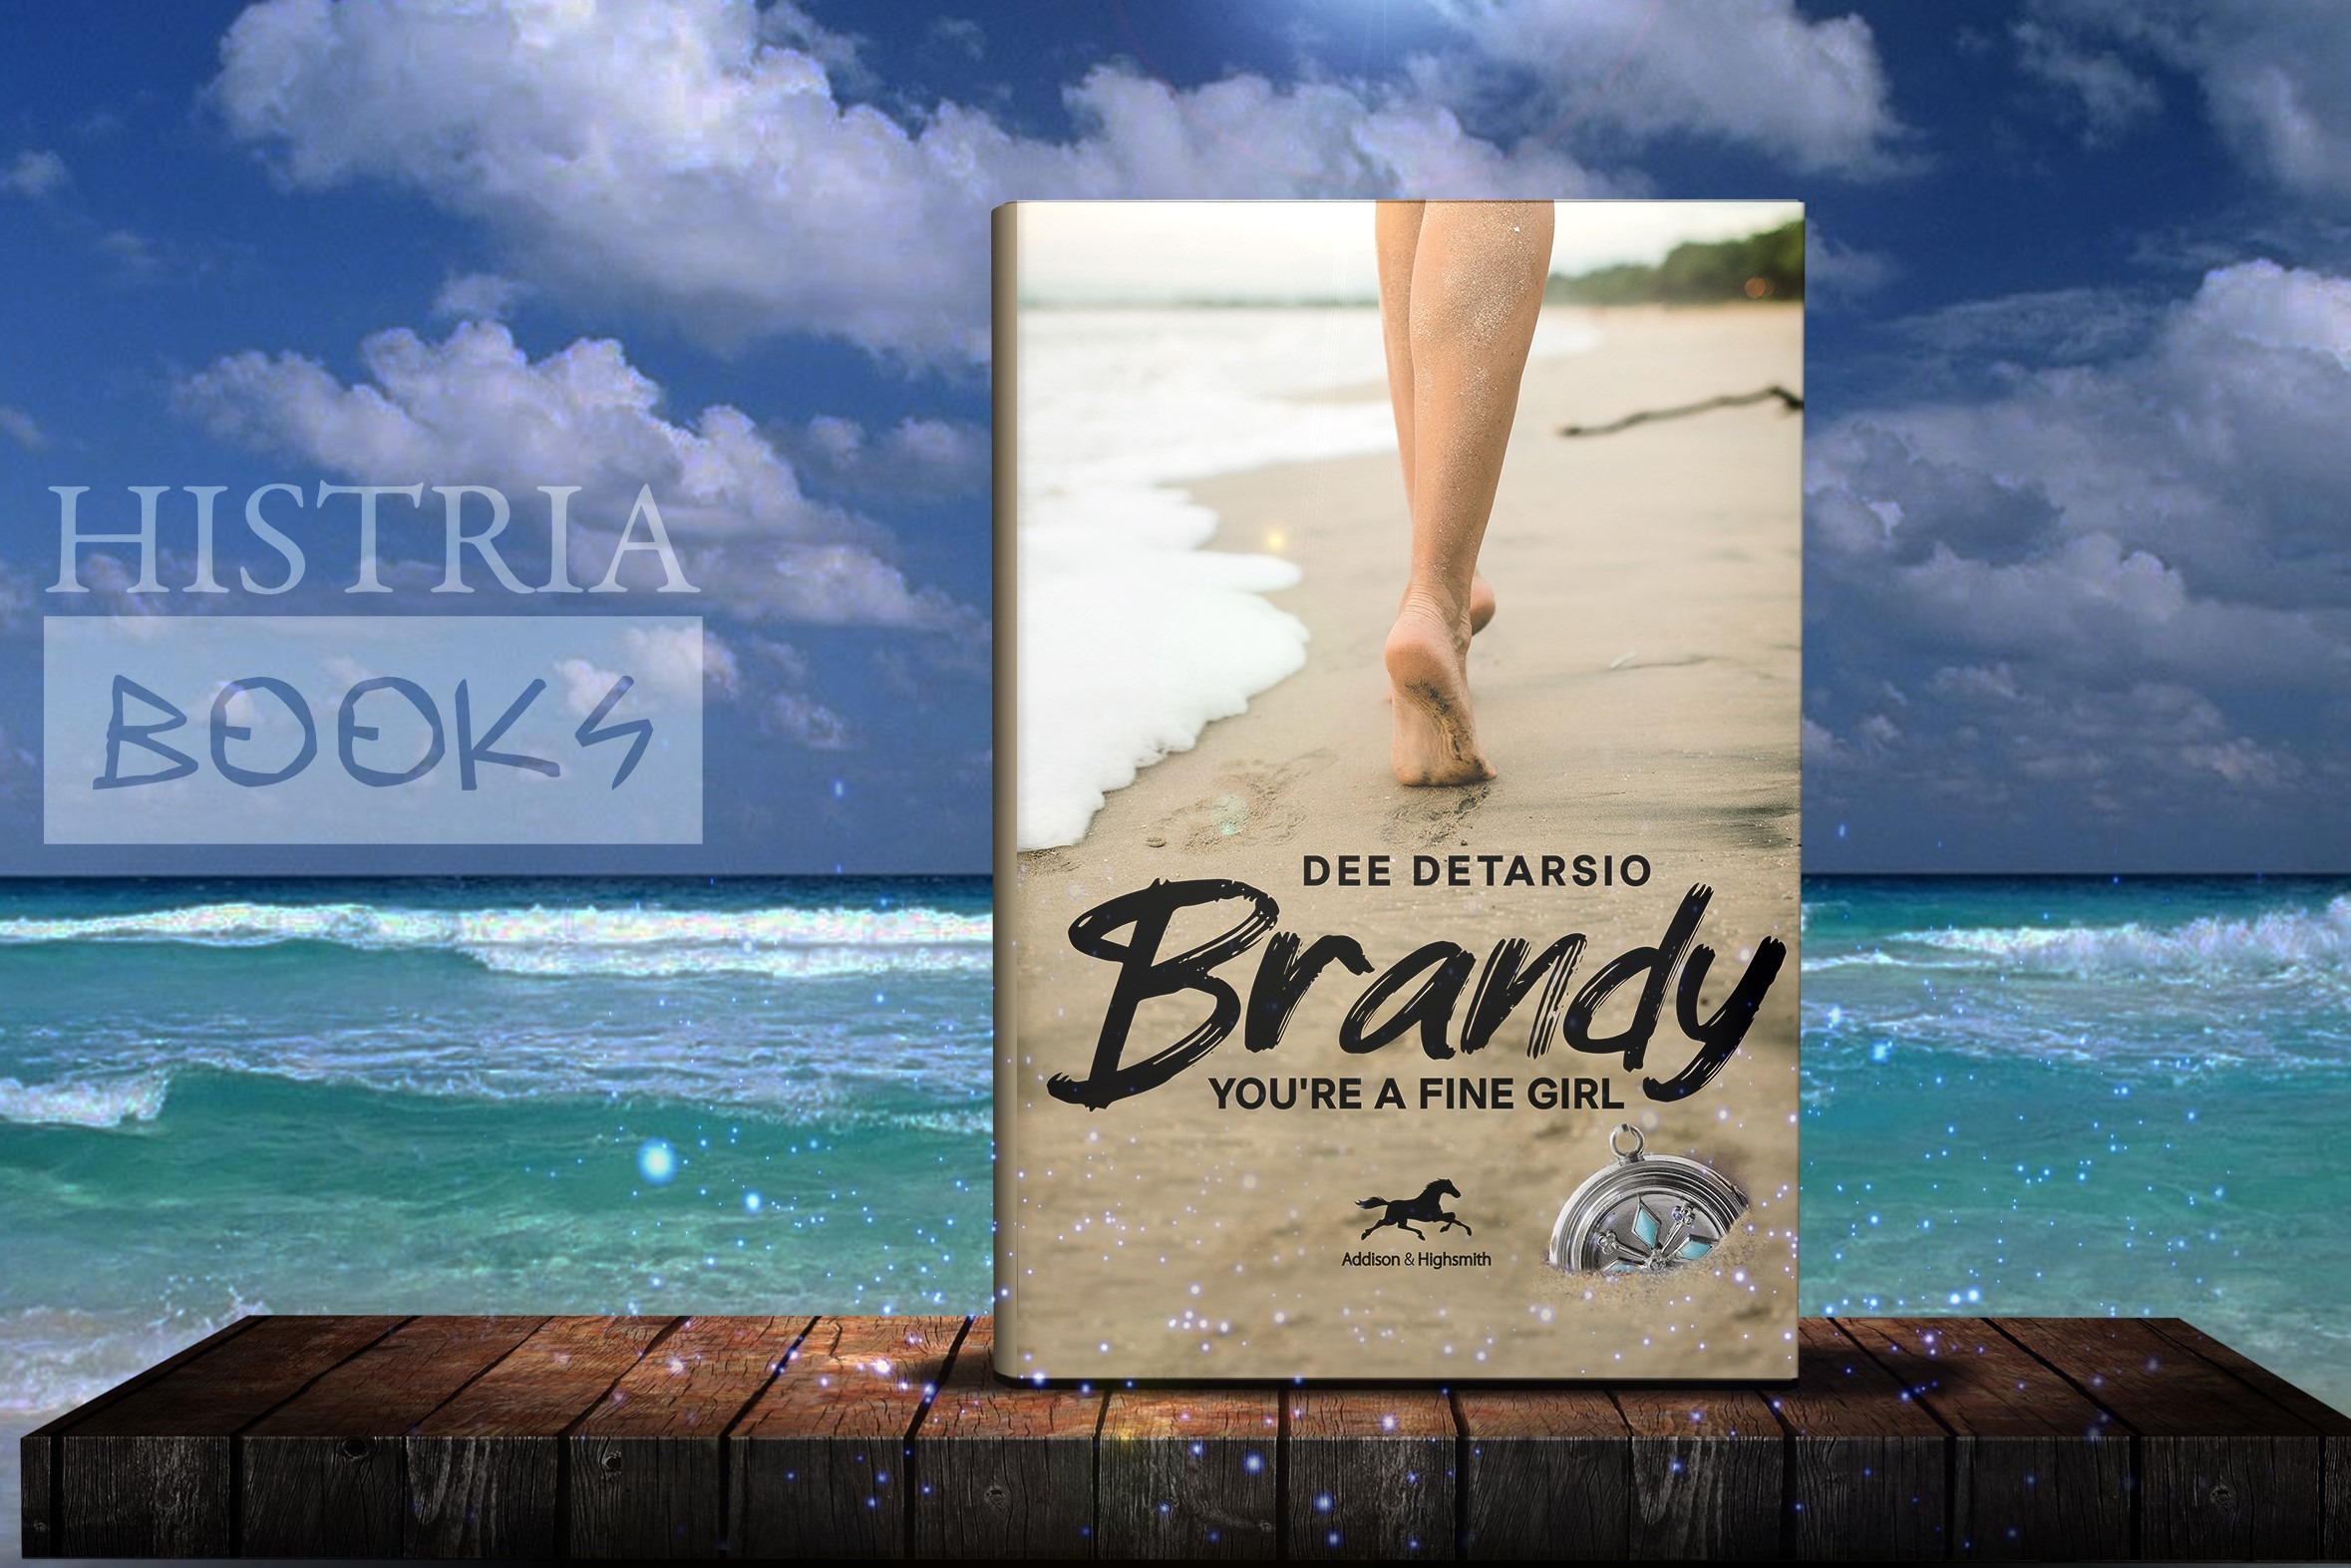 Brandy, You’re a Fine Girl by Dee DeTarsio, available now from Histria Books